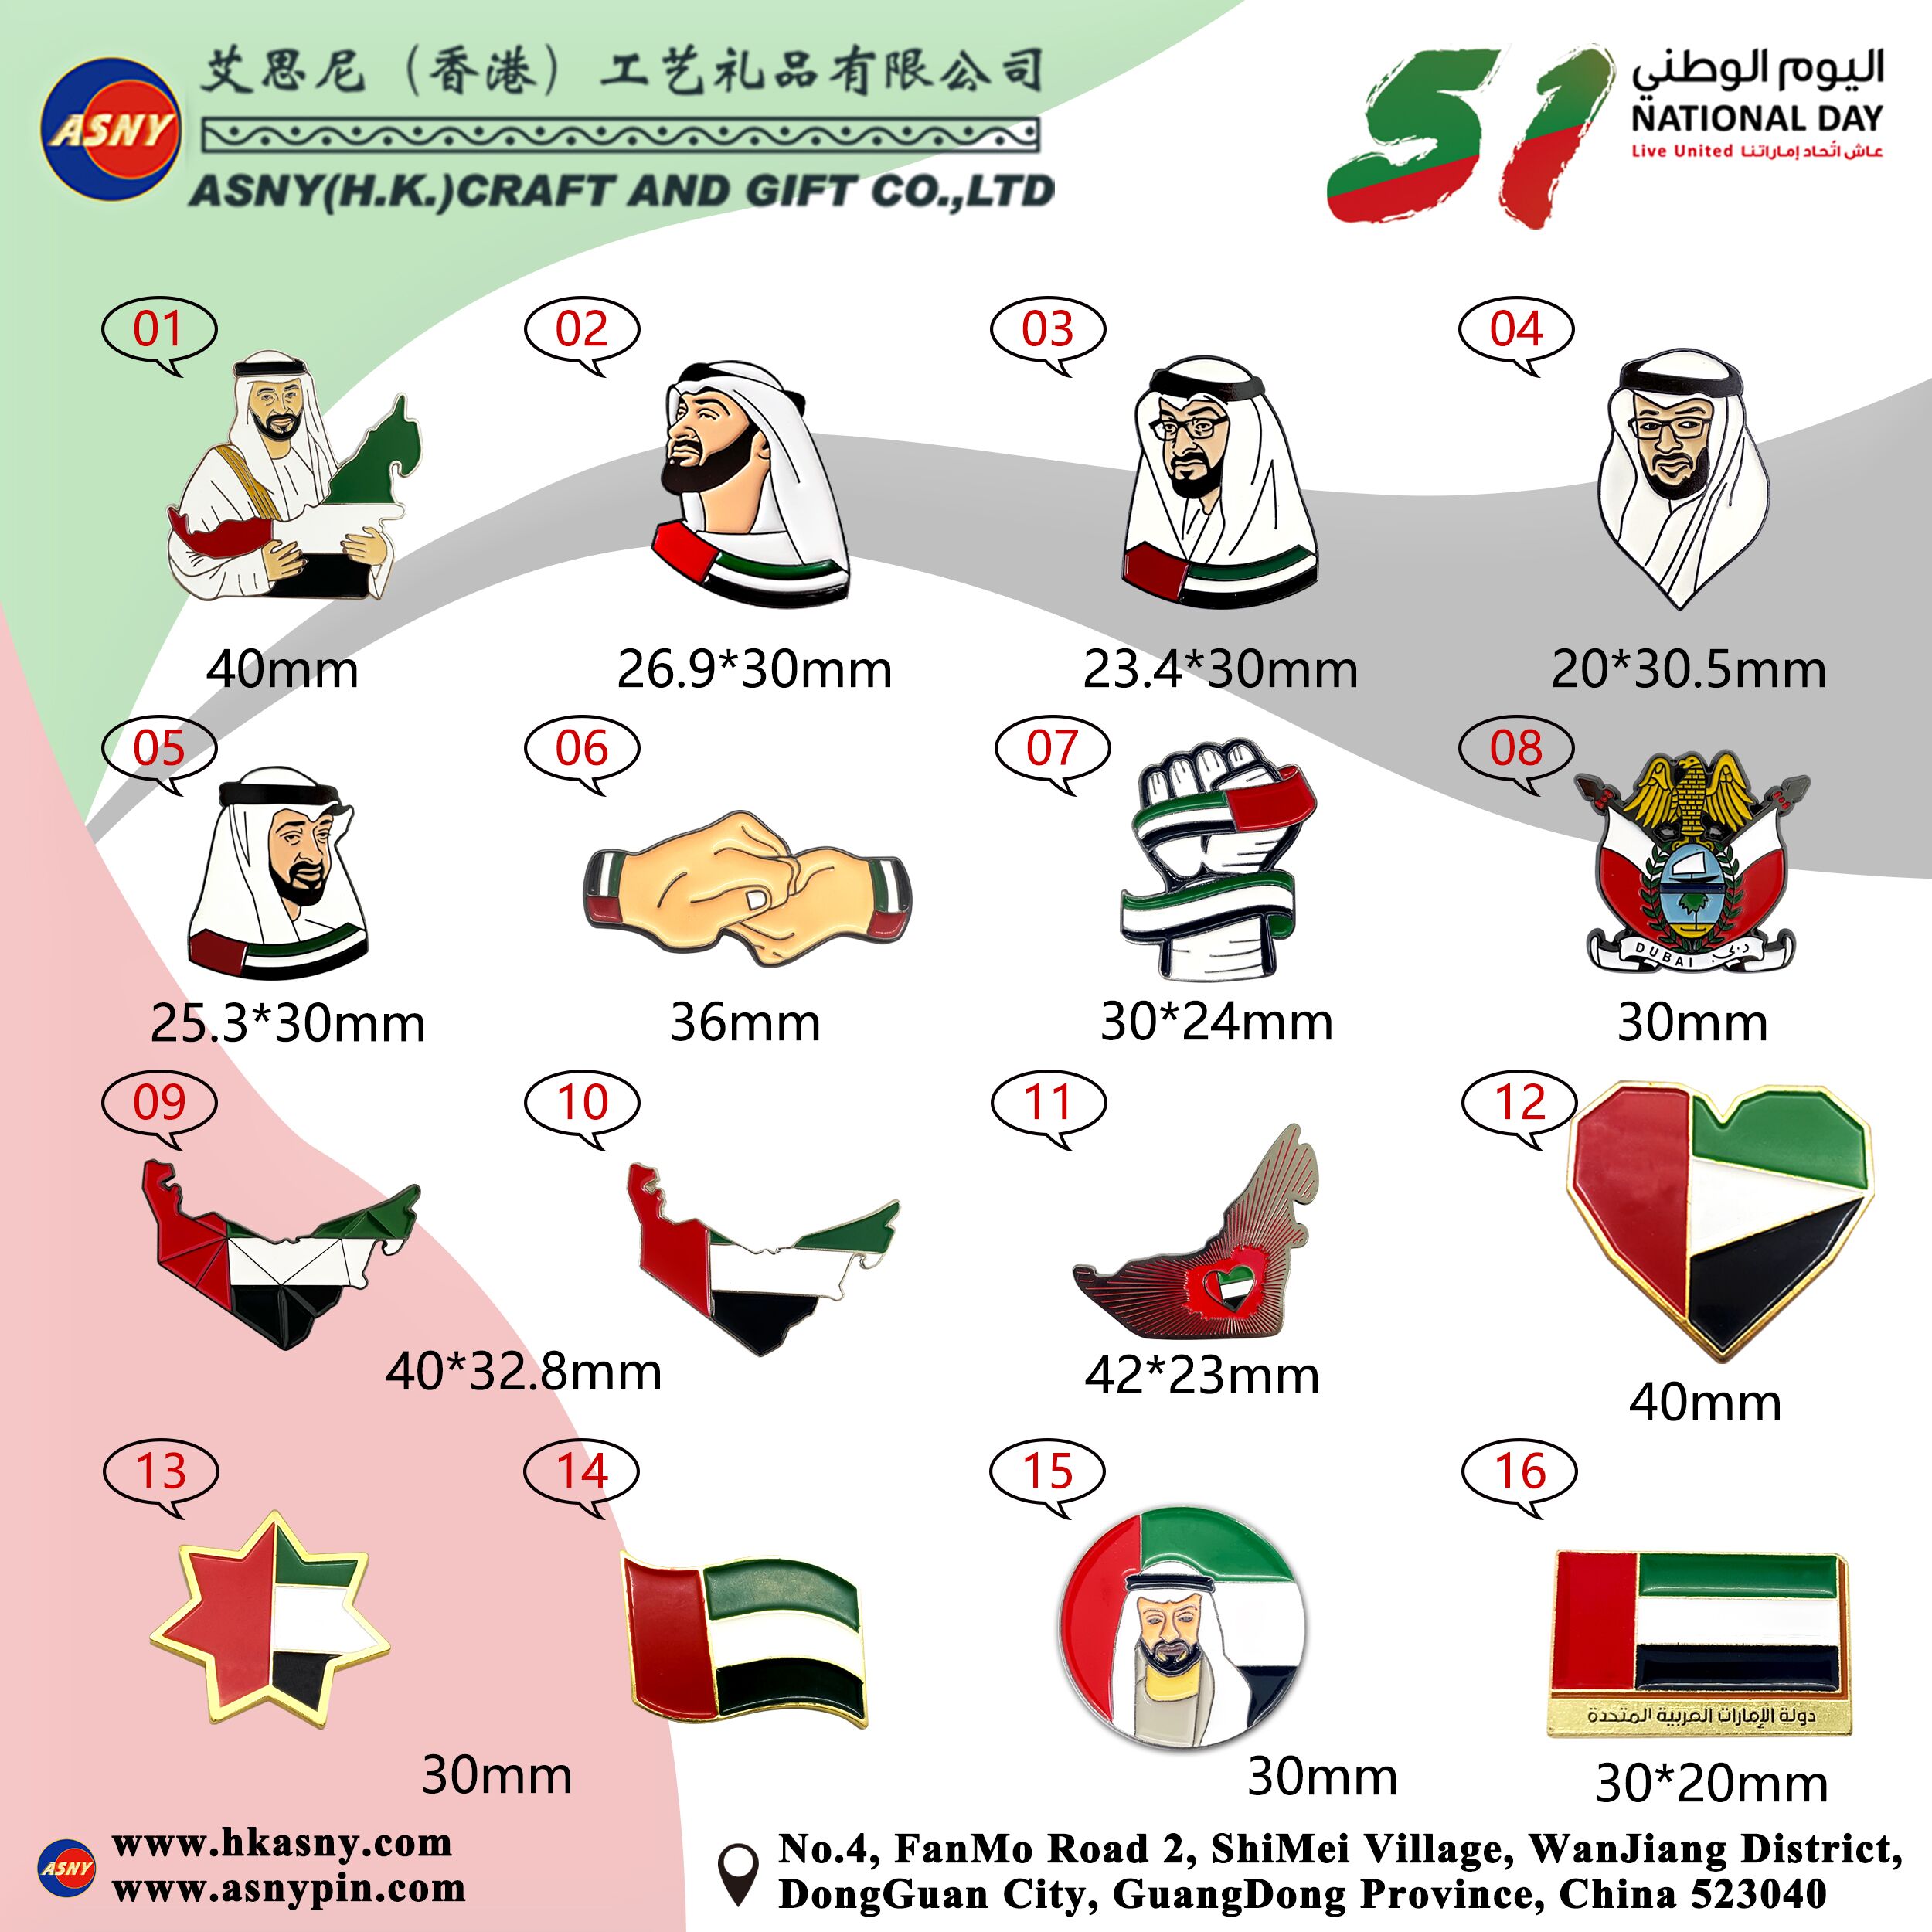 Product Catalog - UAE 51st National Day Collection (1)